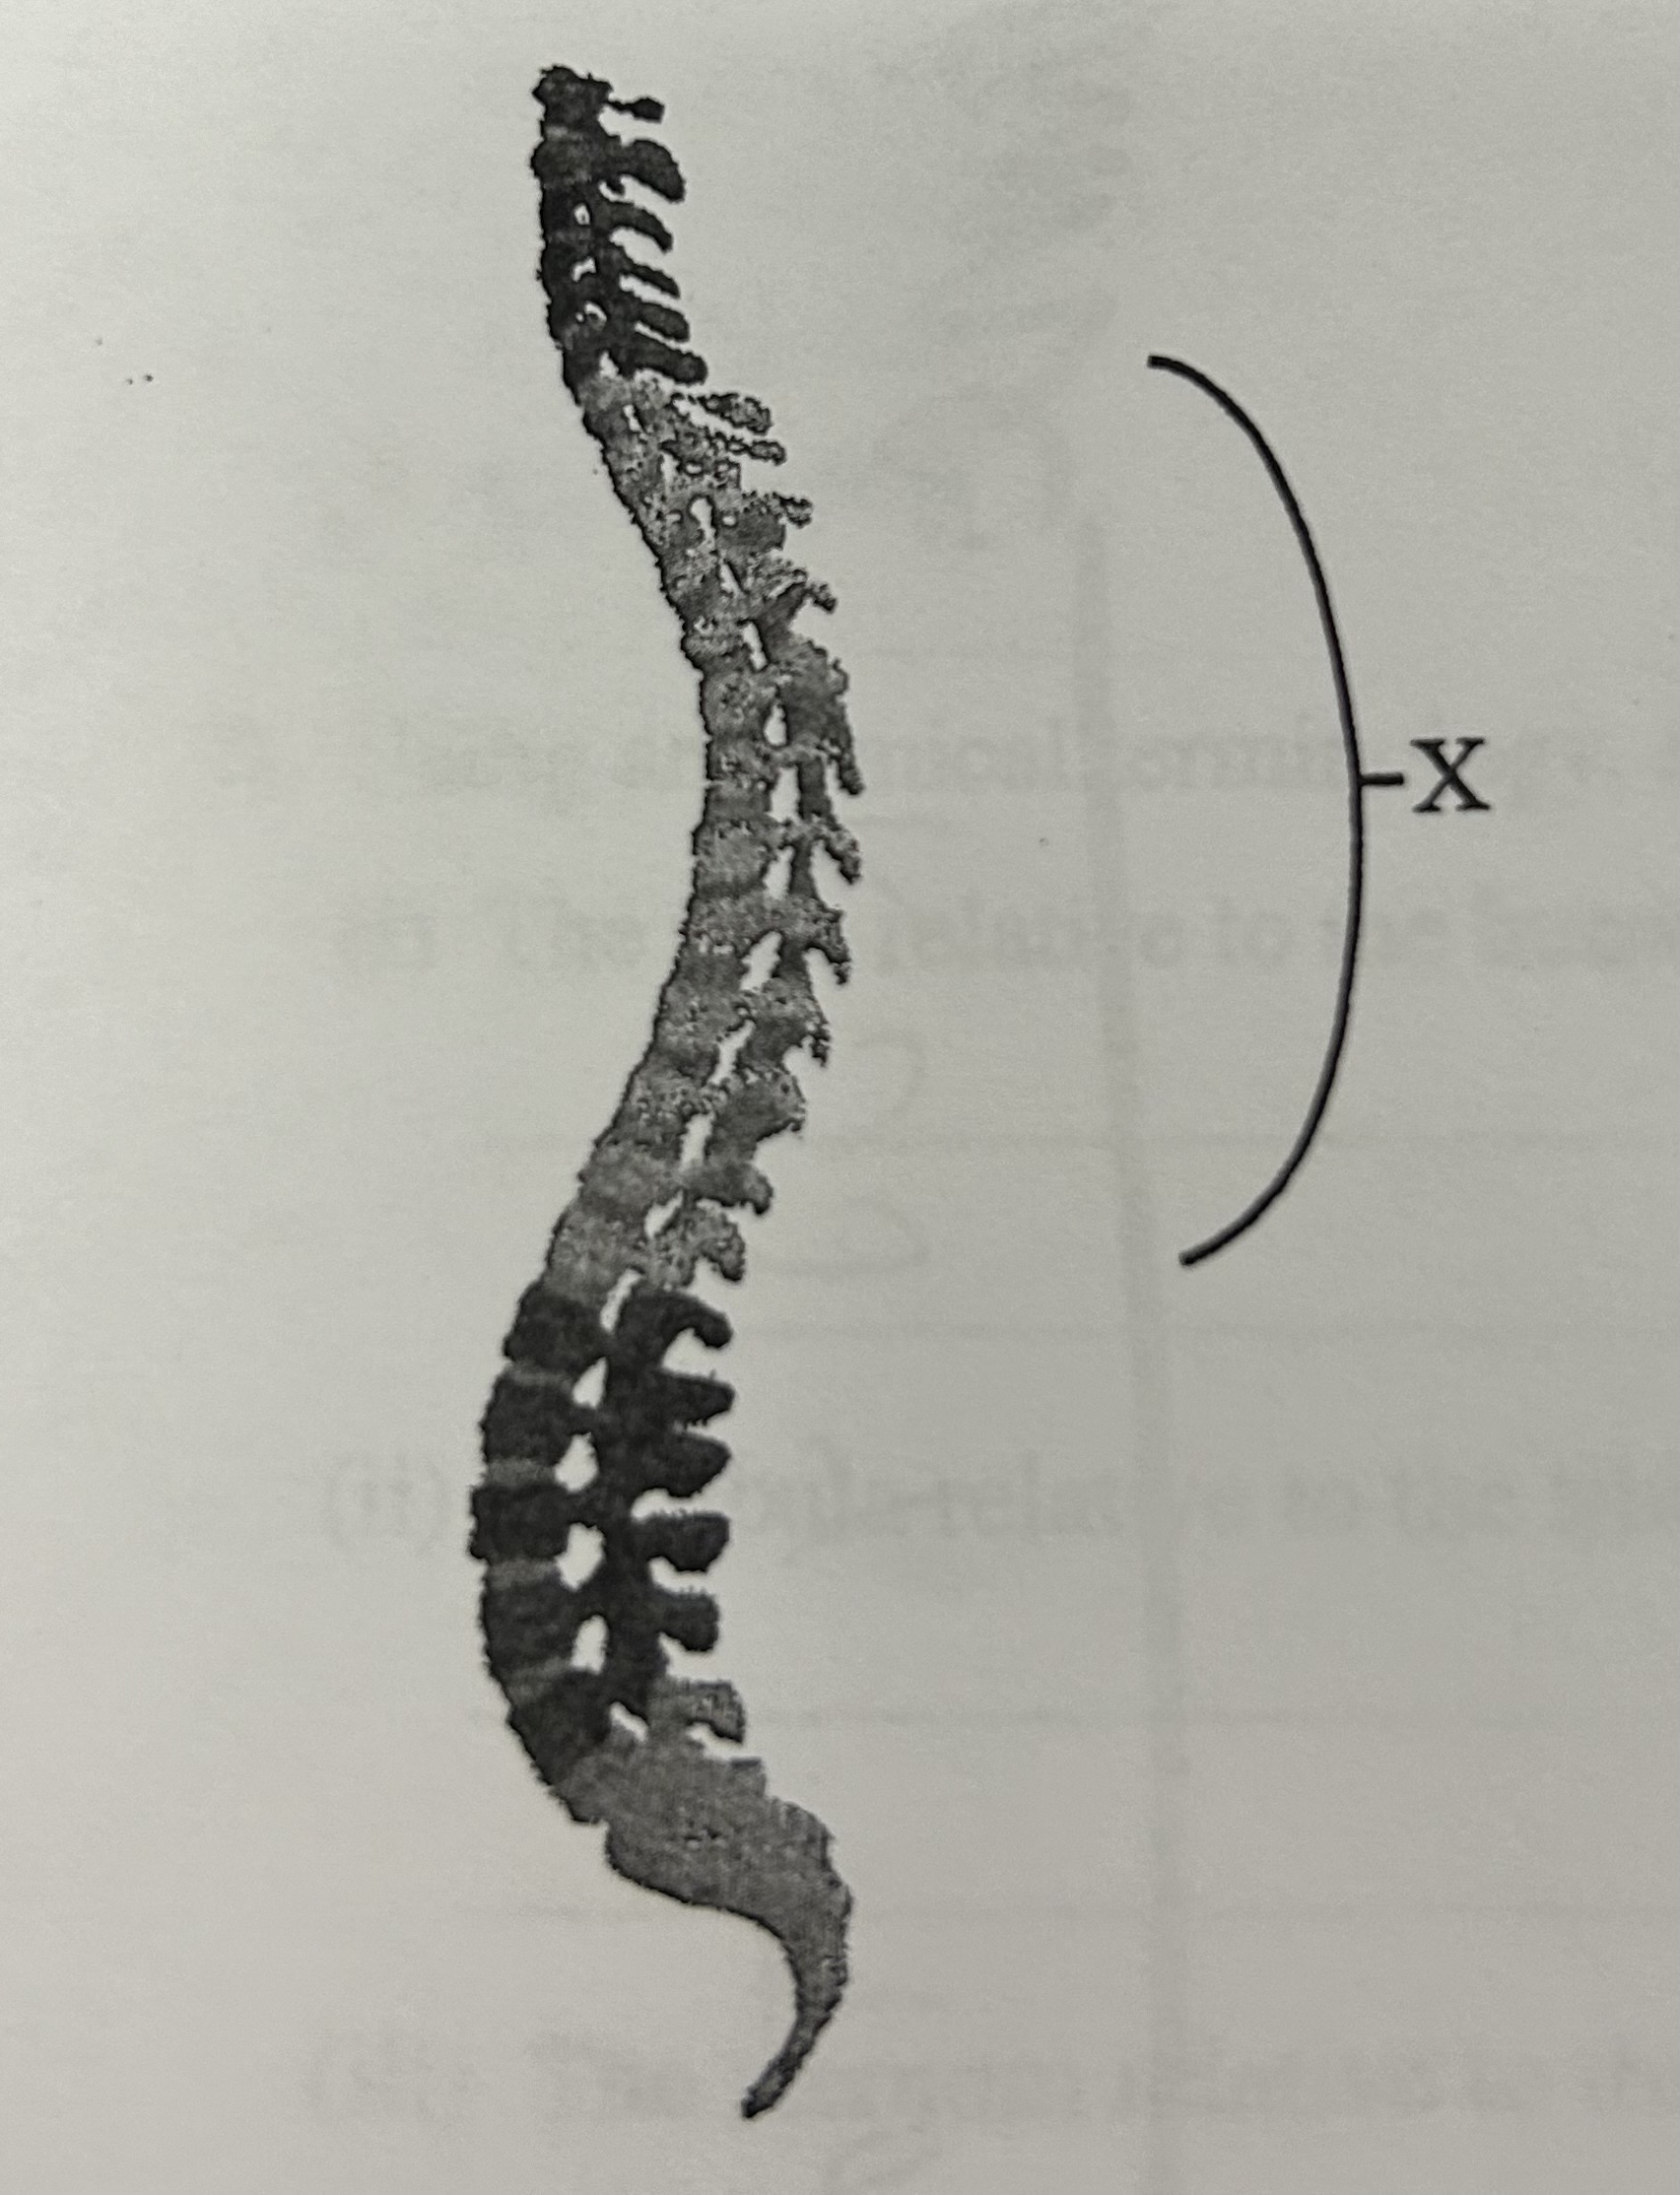 <p>Which area of the vertebral column is labelled X in the diagram?</p>